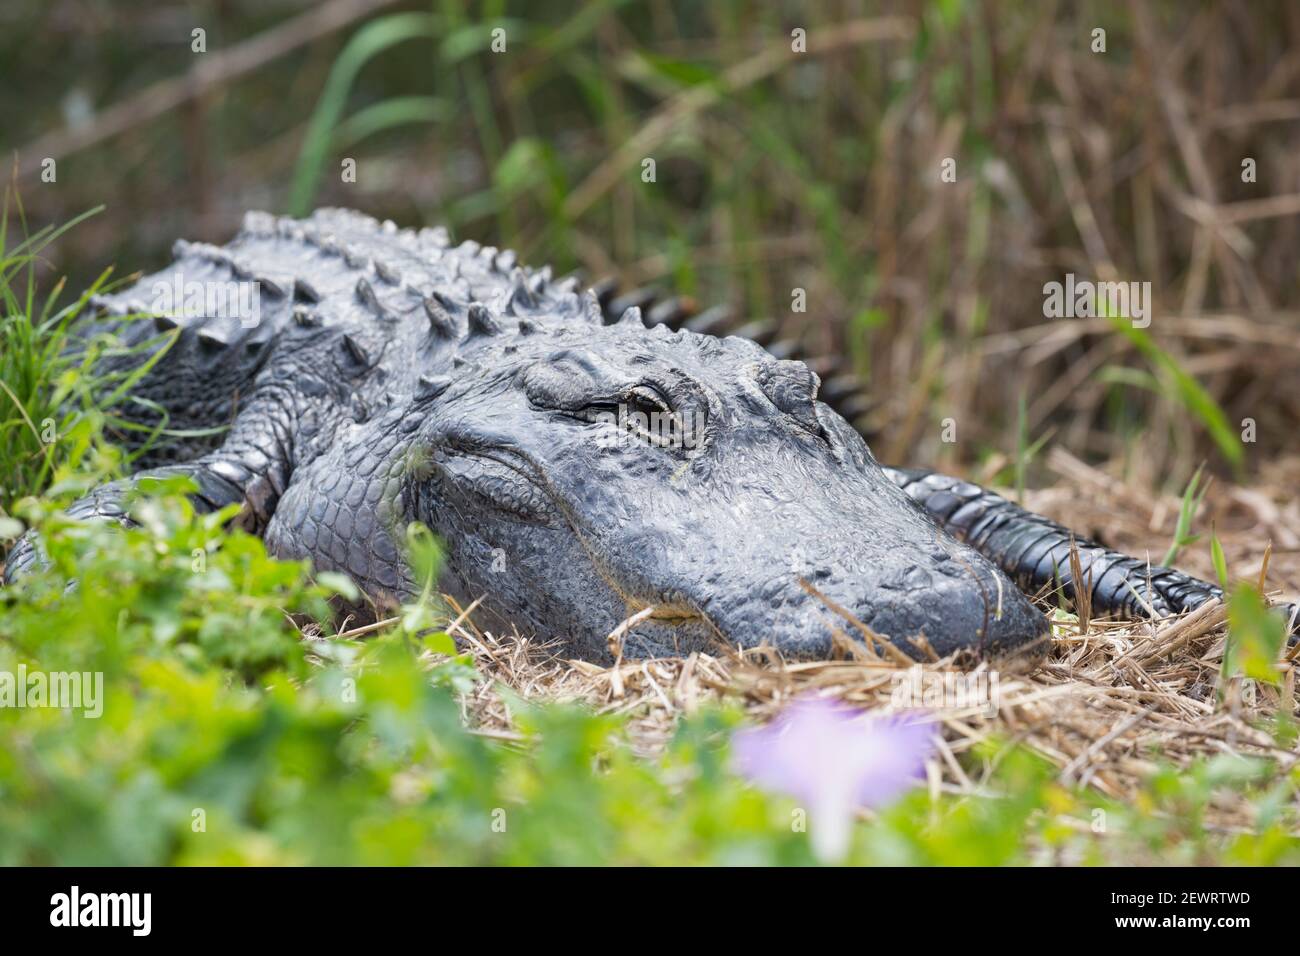 American alligator (Alligator mississippiensis), at rest beside the Anhinga Trail, Everglades National Park, Florida, United States of America Stock Photo